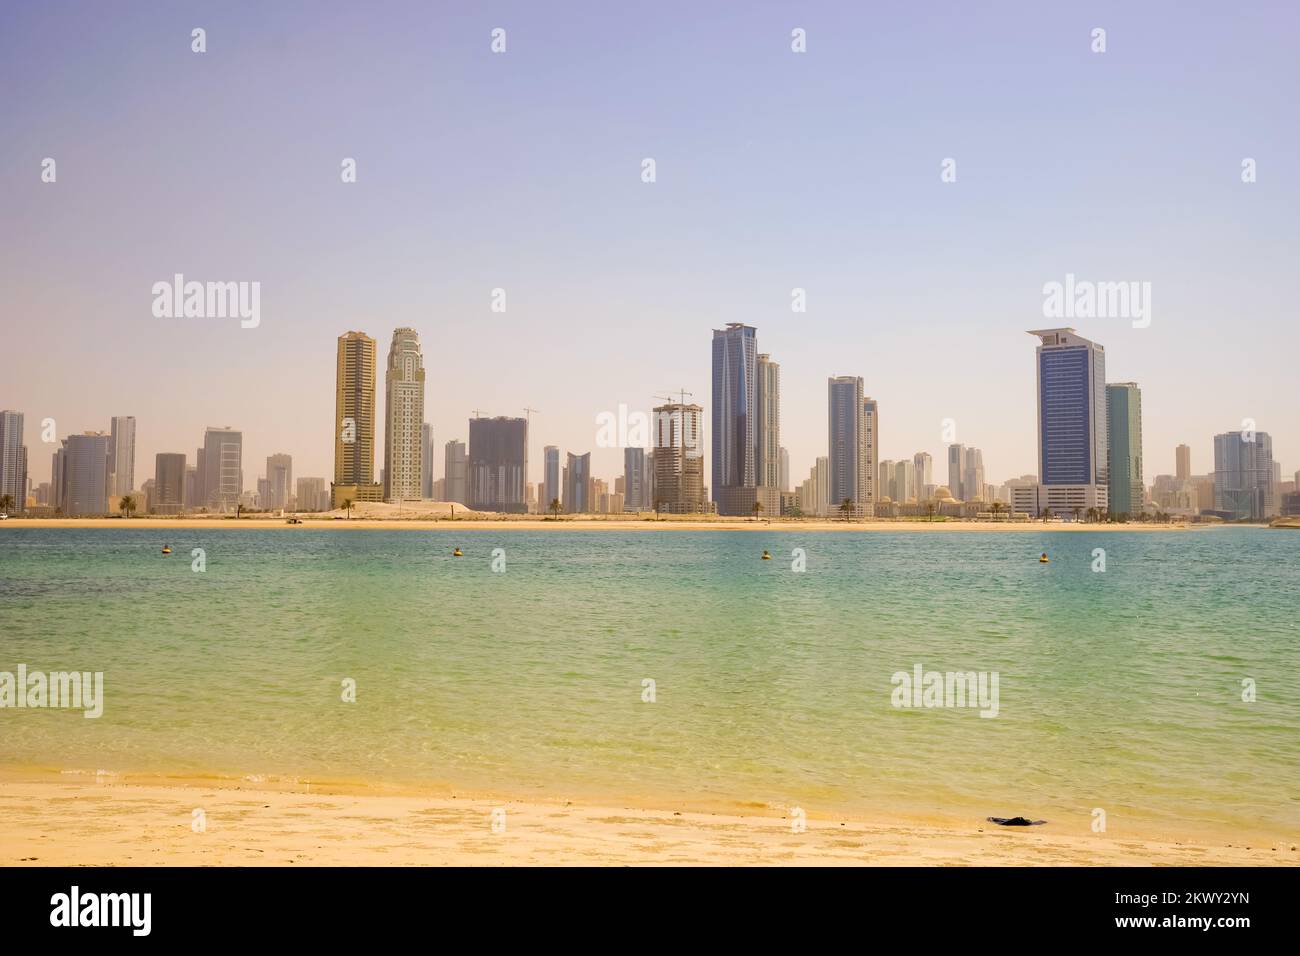 DUBAI - OCT 14: Dubai cityscapeon October 14, 2014. Dubai is the most populous city and emirate in the UAE, and the second largest emirate by territor Stock Photo